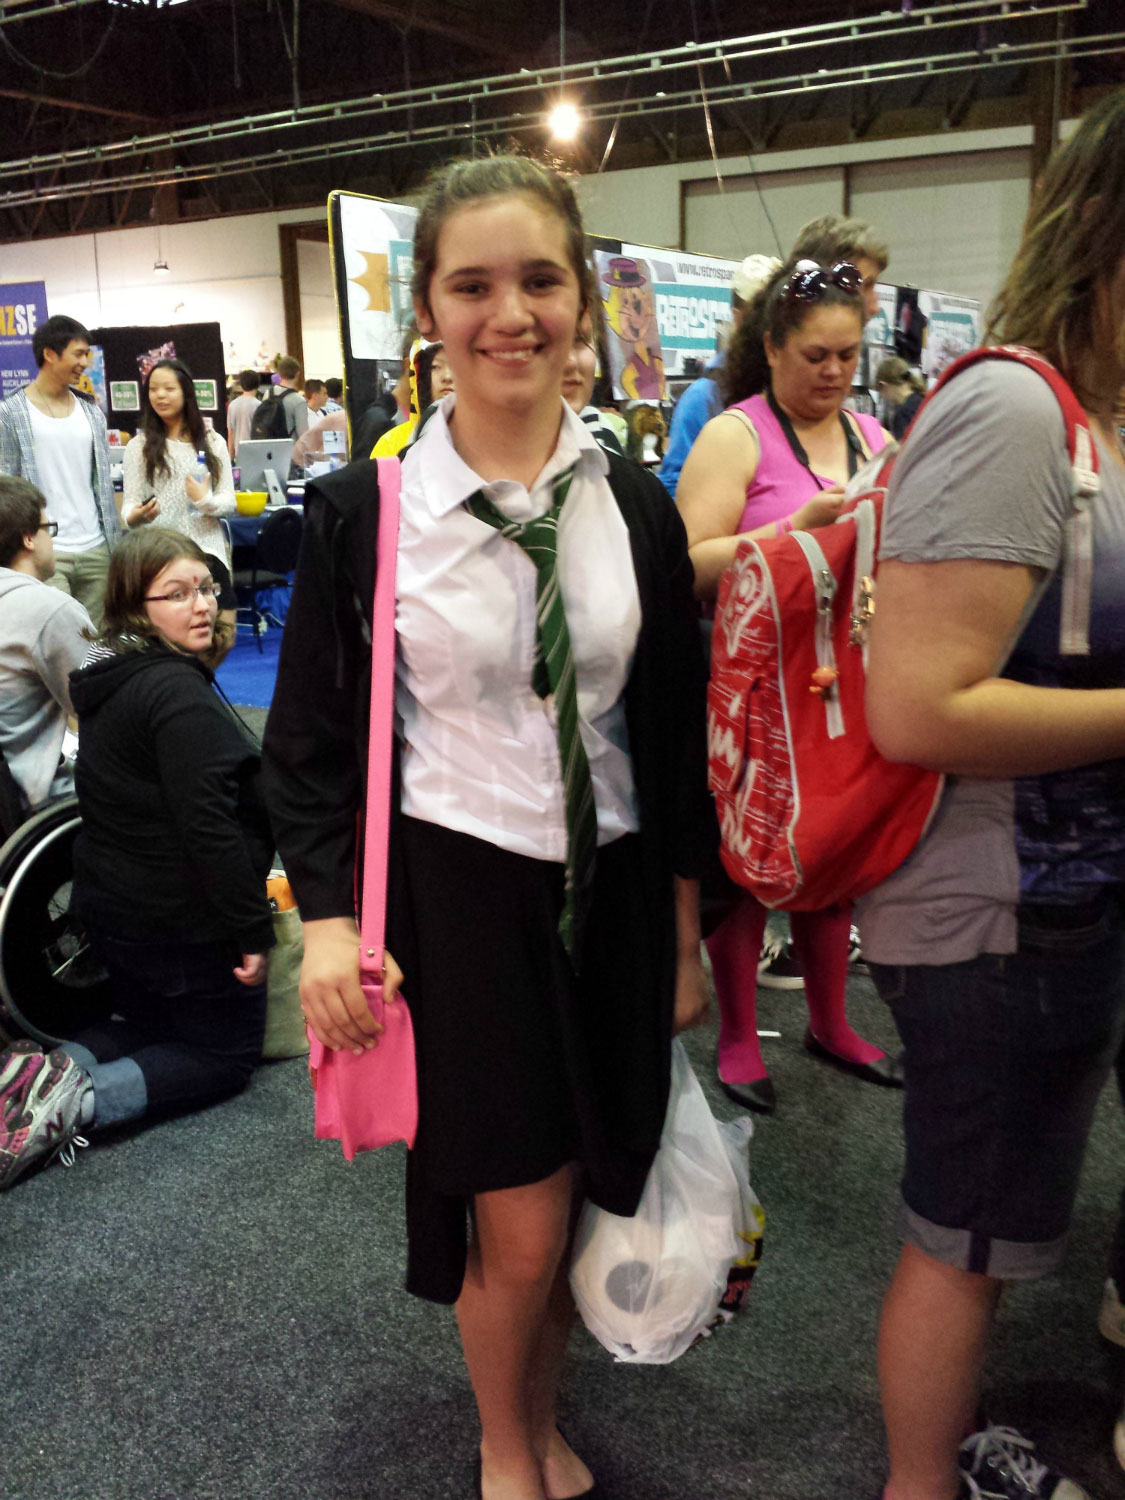 Armageddon Expo 2013 Auckland – Oct 27 – Fans In Costume – 5 (Photo credit: Tracey Wong)